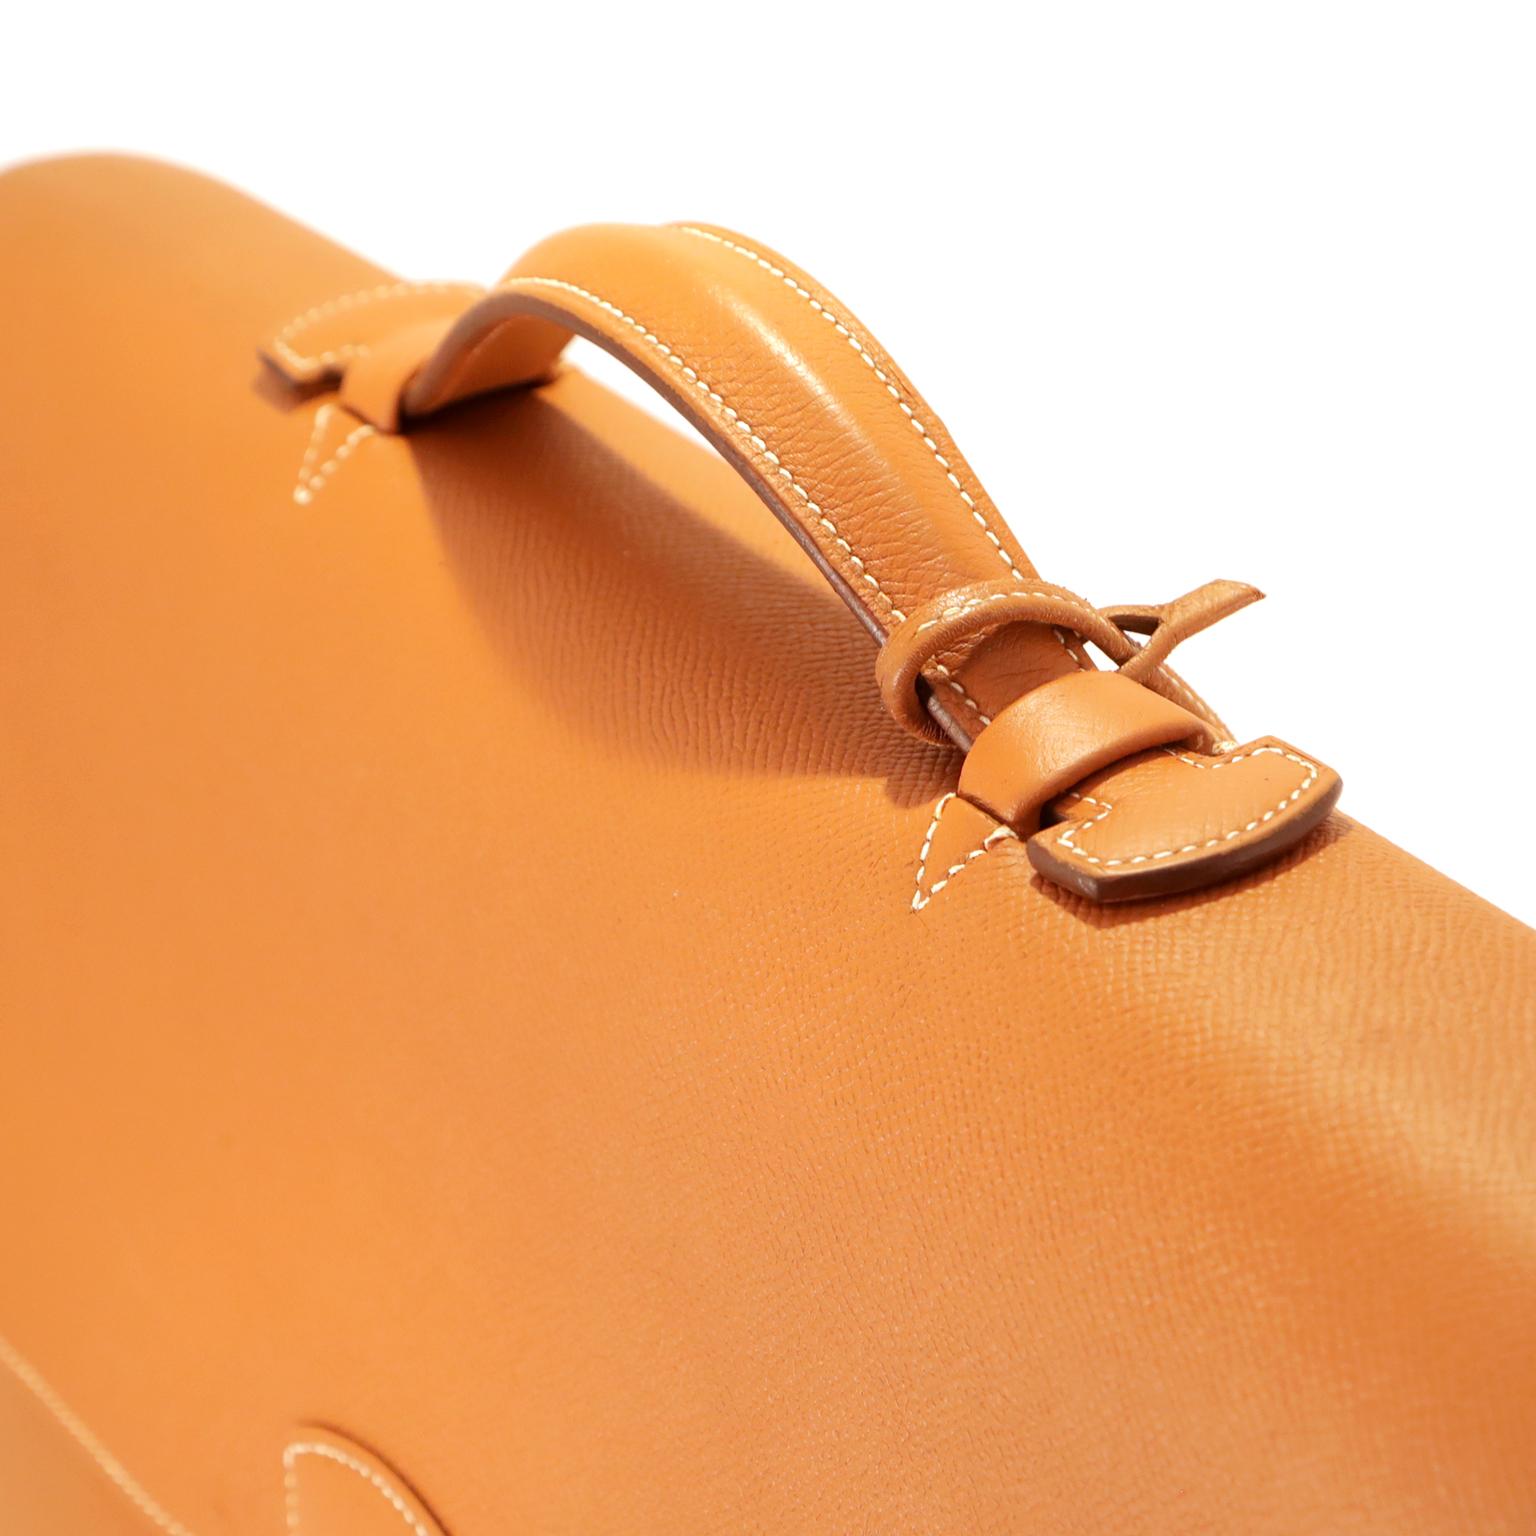  Hermès Gold Epsom Leather Sac a Depeches Briefcase  2